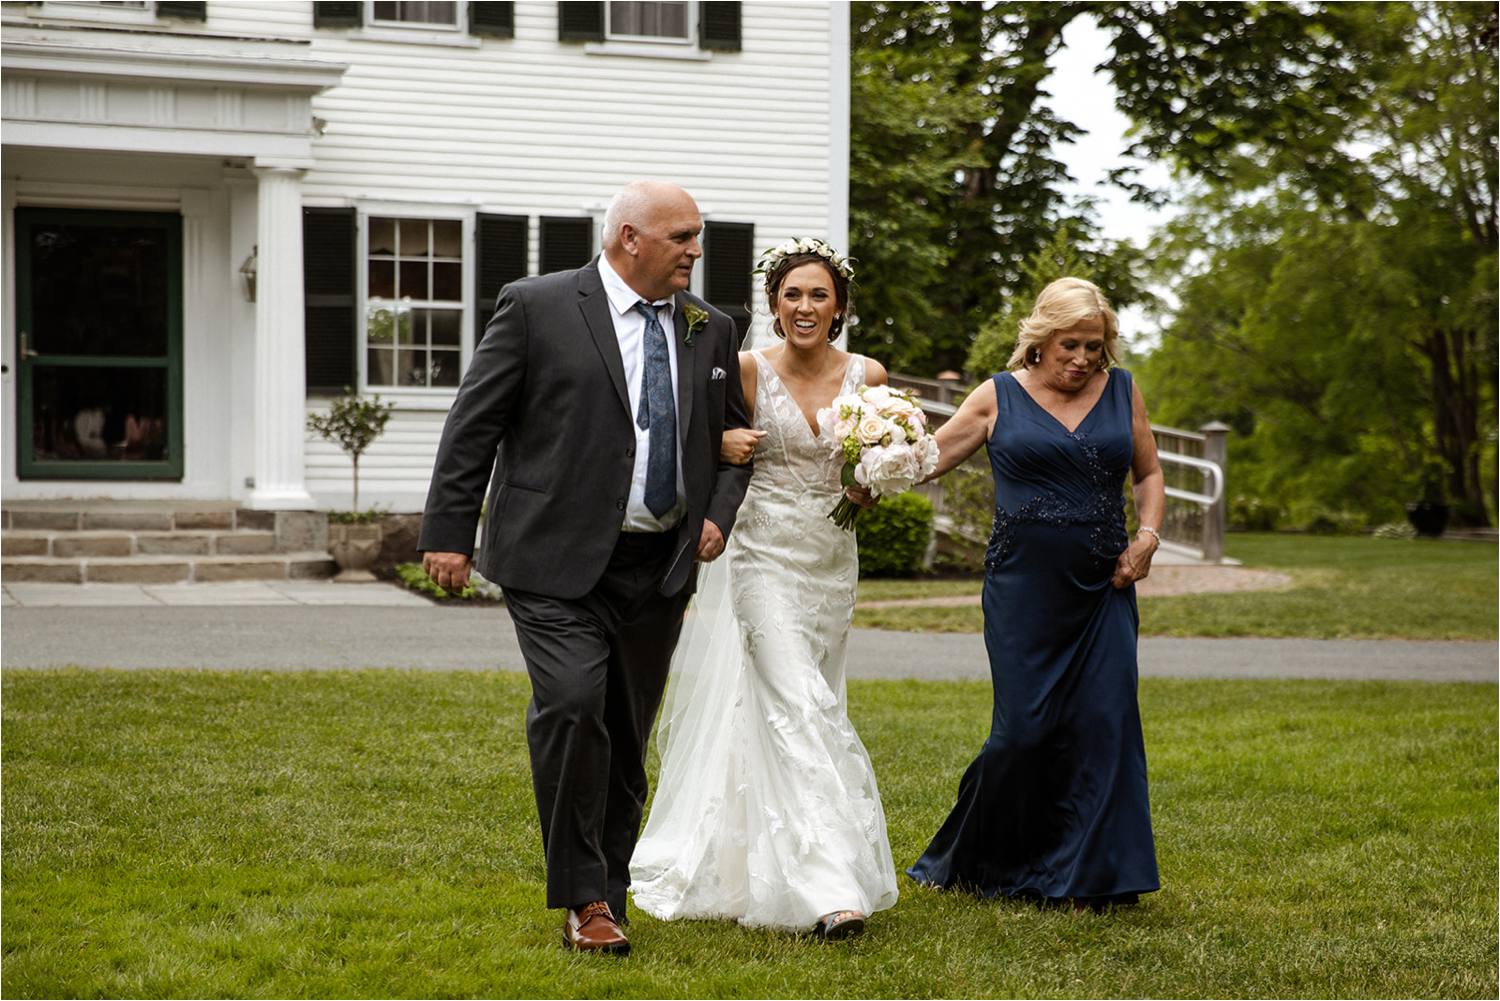 Bride walking down aisle with mother and father